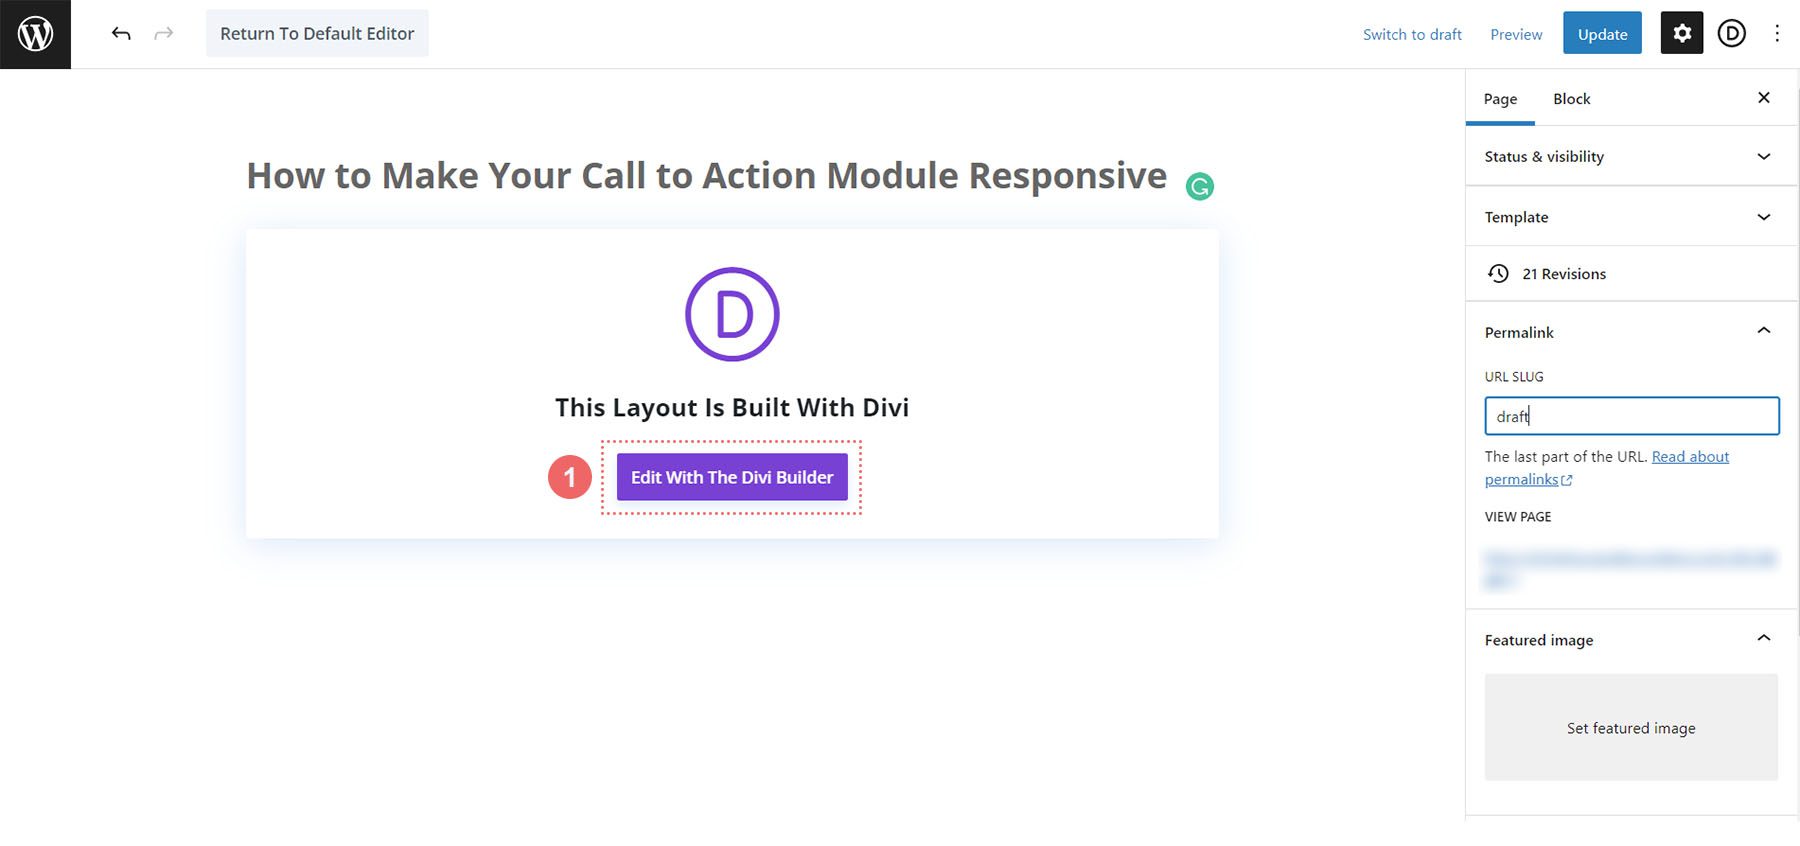 Edit with the Divi Builder